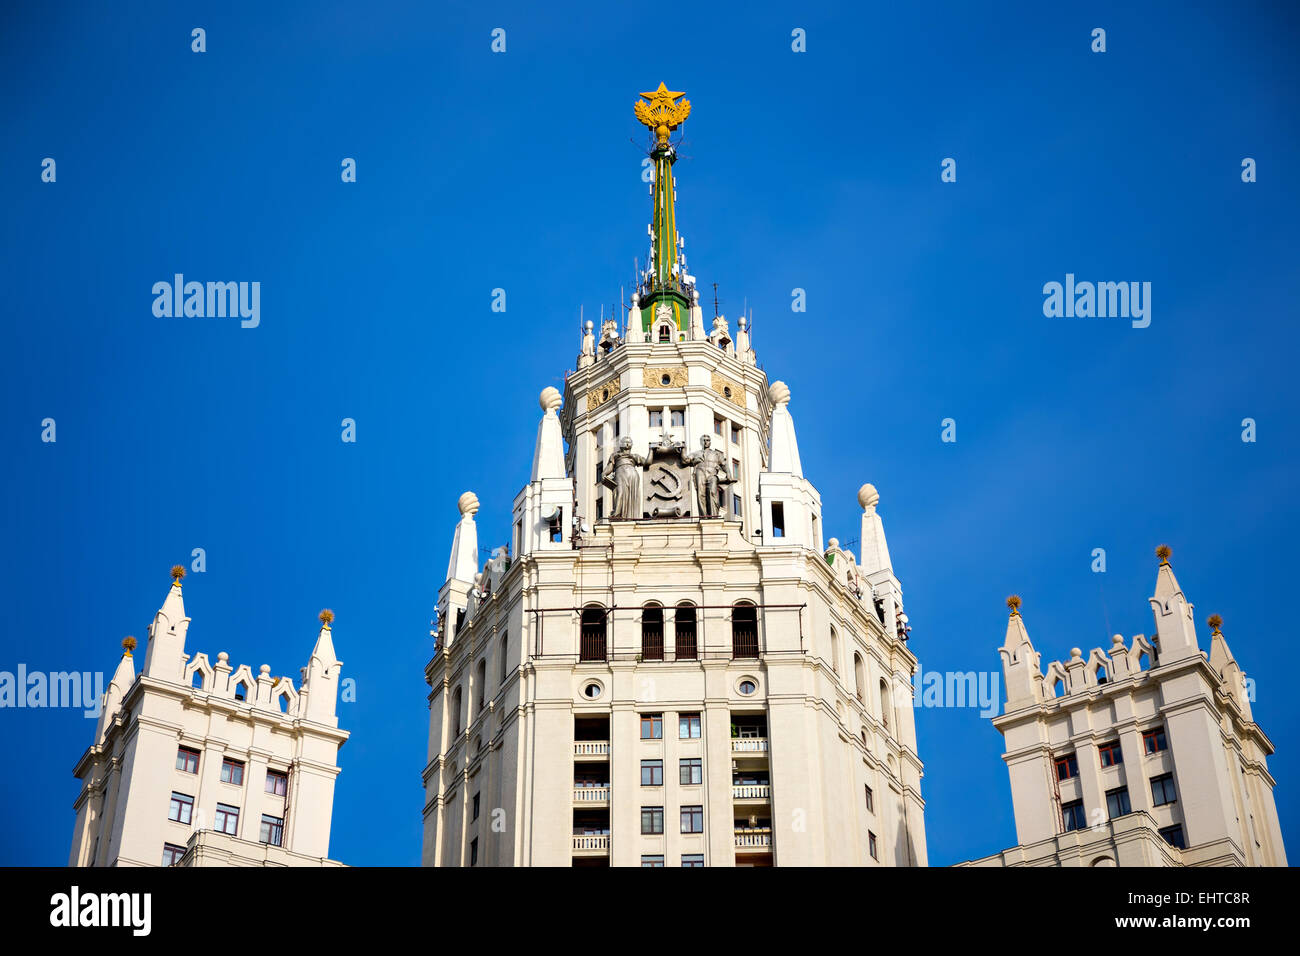 The tower and spire of the Kotelnicheskaya skyscraper on the sky background in Moscow, Russia Stock Photo